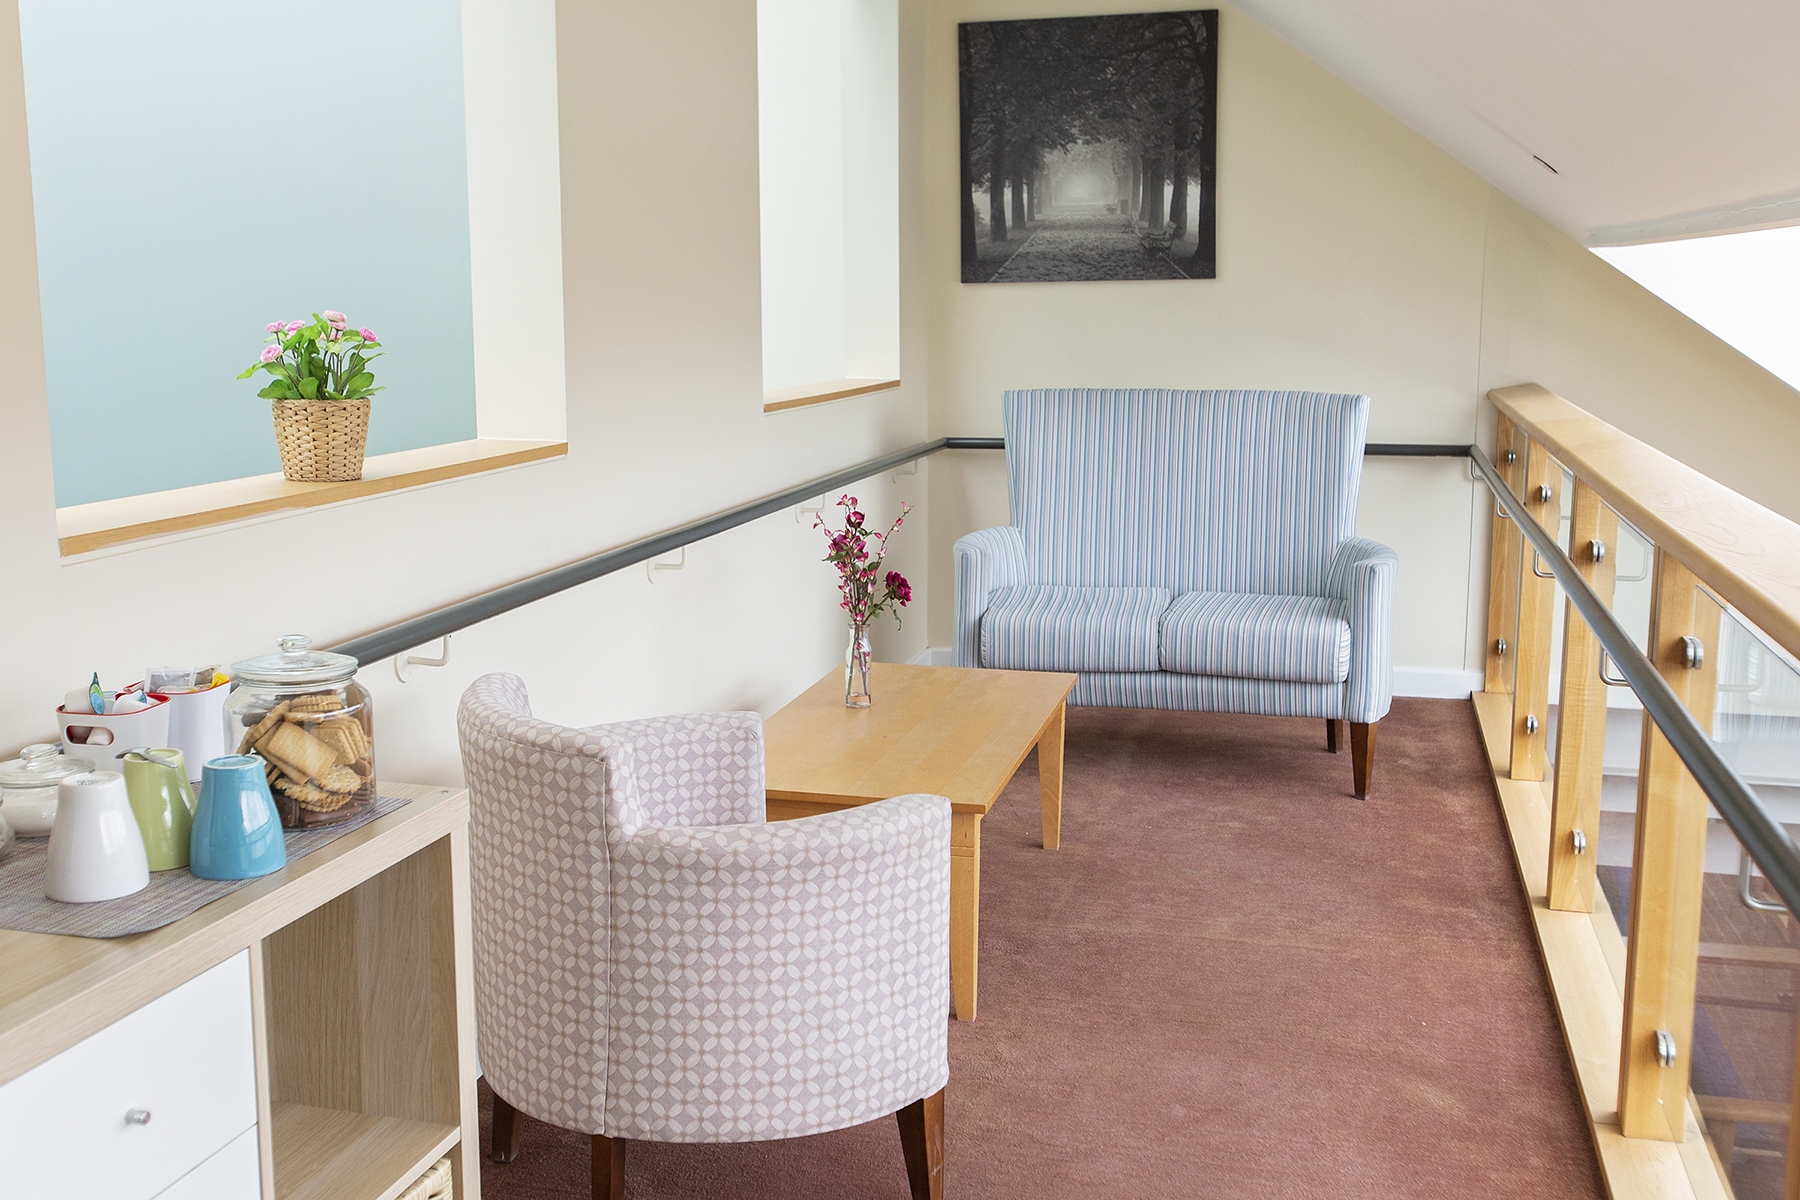 Seating area at Tŷ Penrhos Care Home